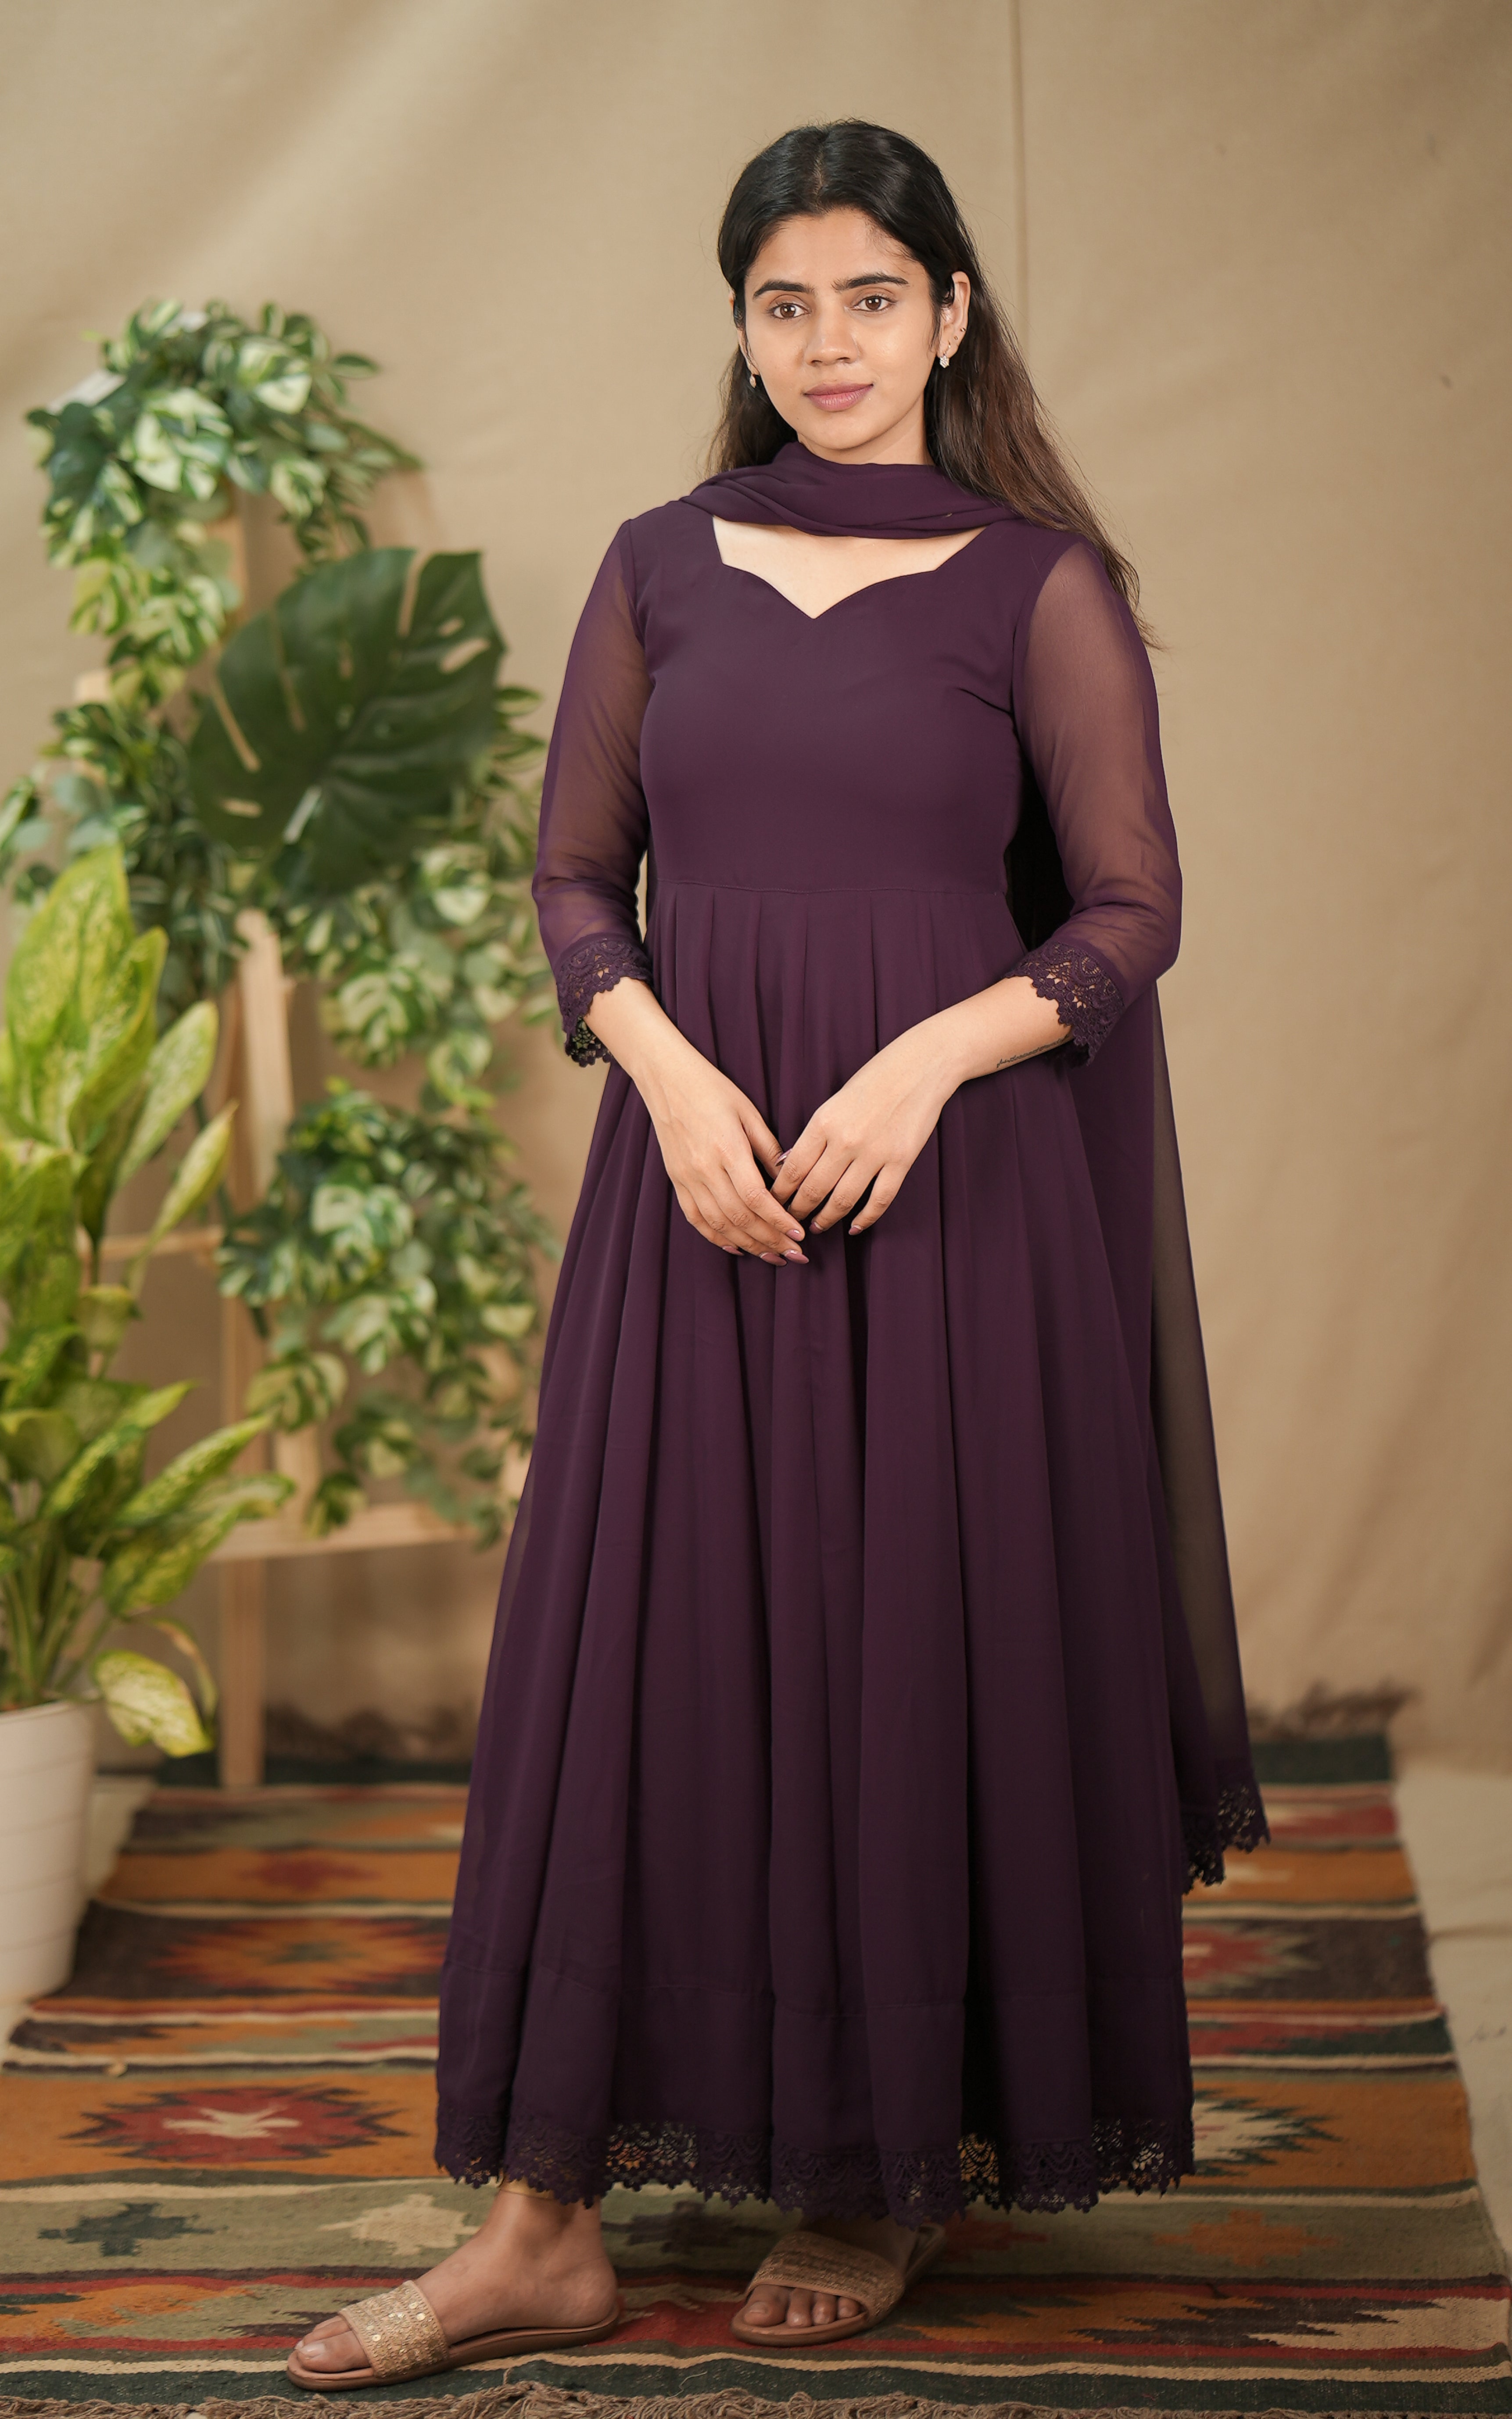 instore kurti melodic dark plum (kurti+dupatta) georgette with butter crepe lining full flared anarkali with crochet lace border color: plum